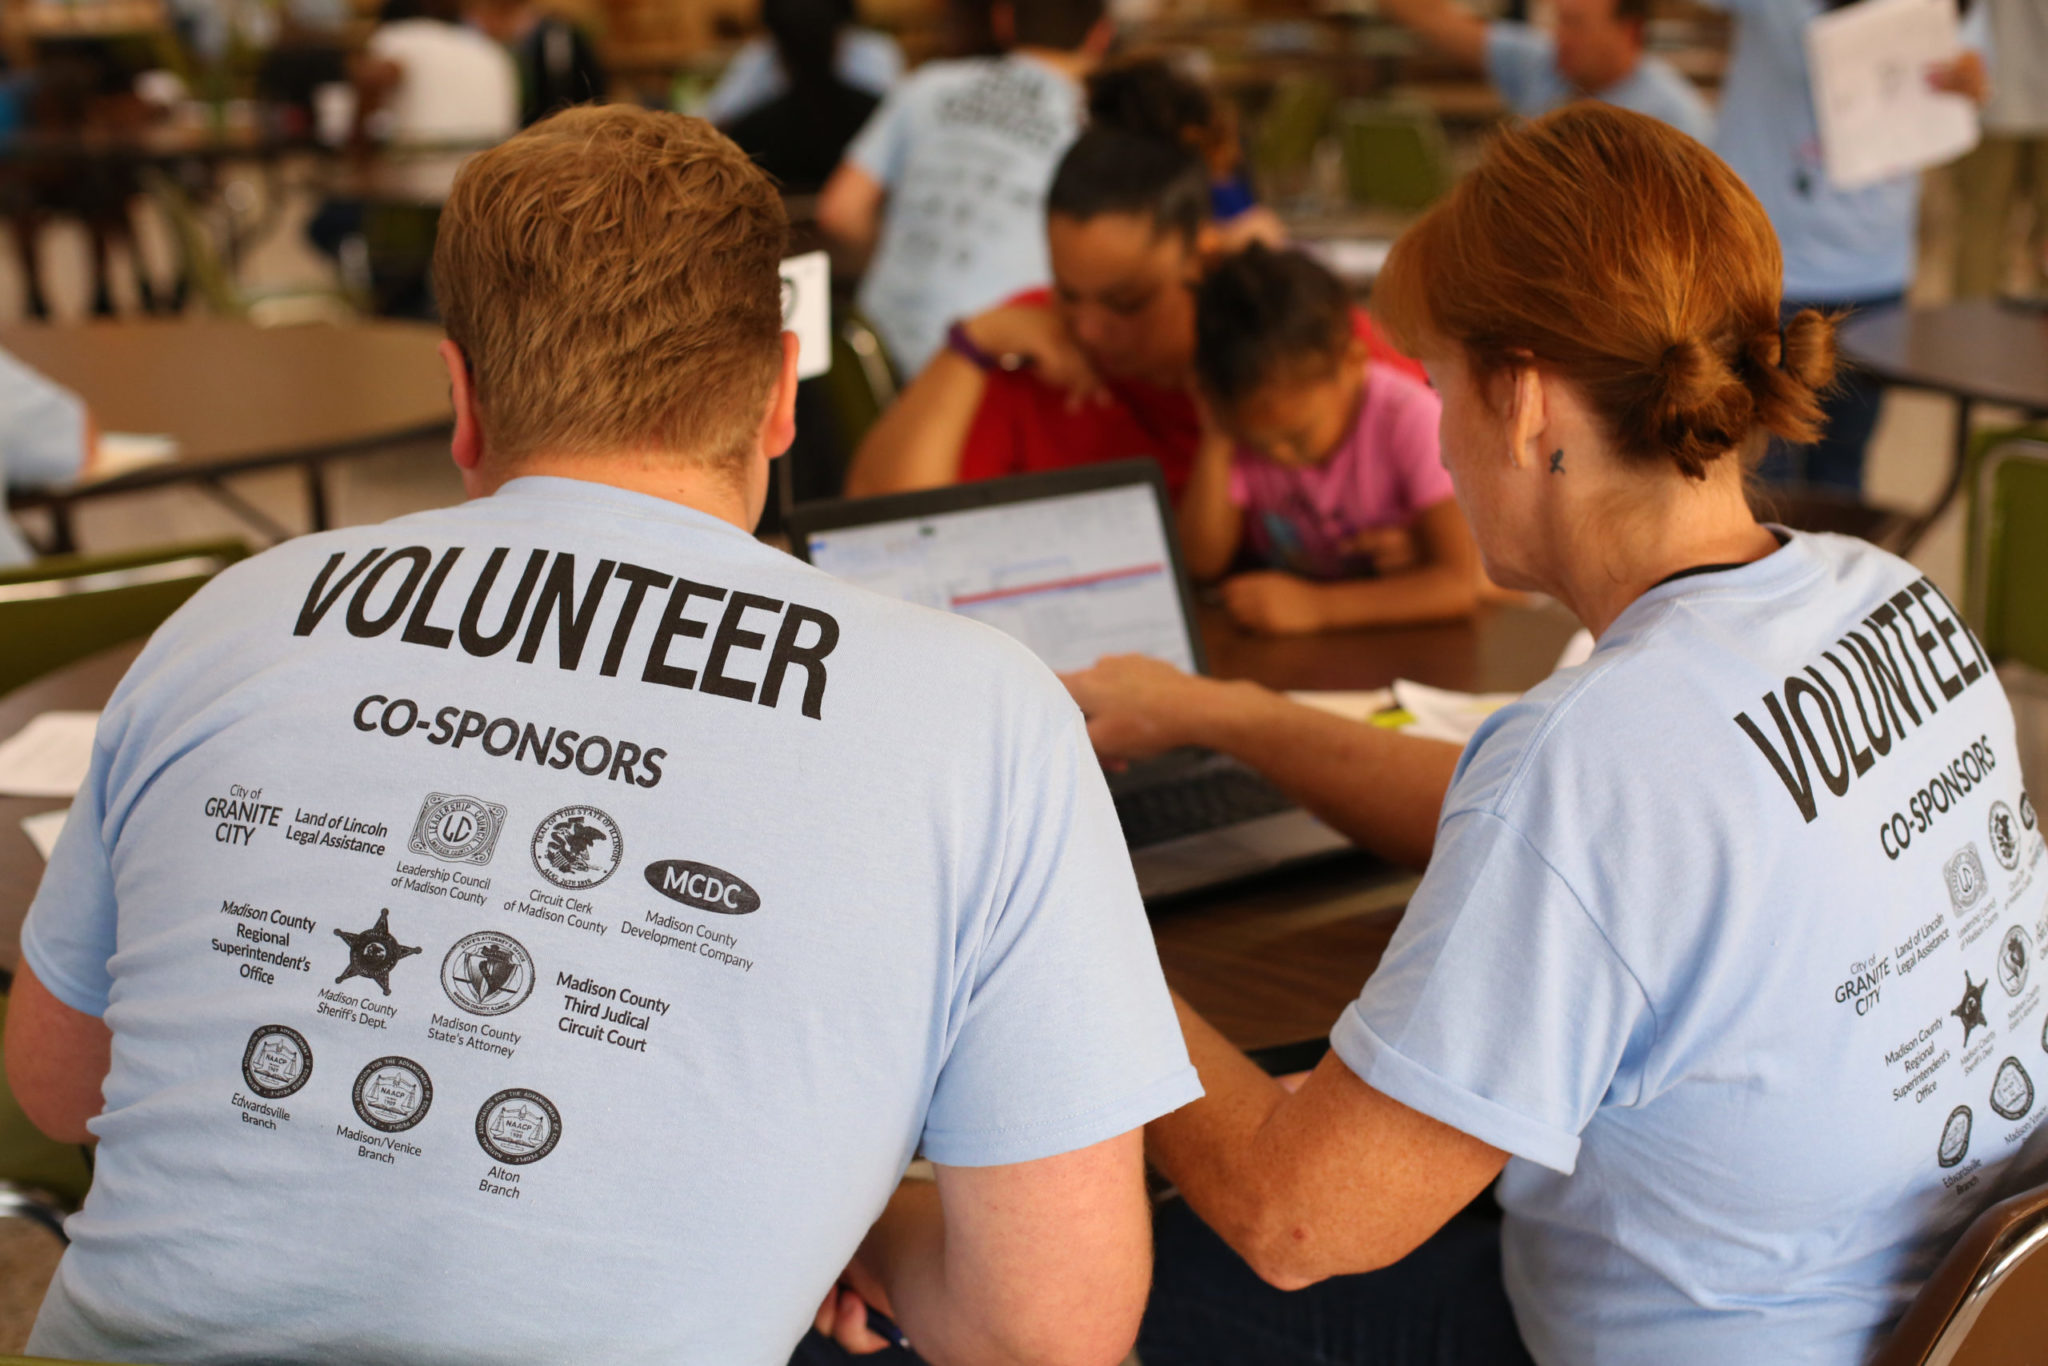 Two people wearing light blue shirts that read "volunteer" look at a computer